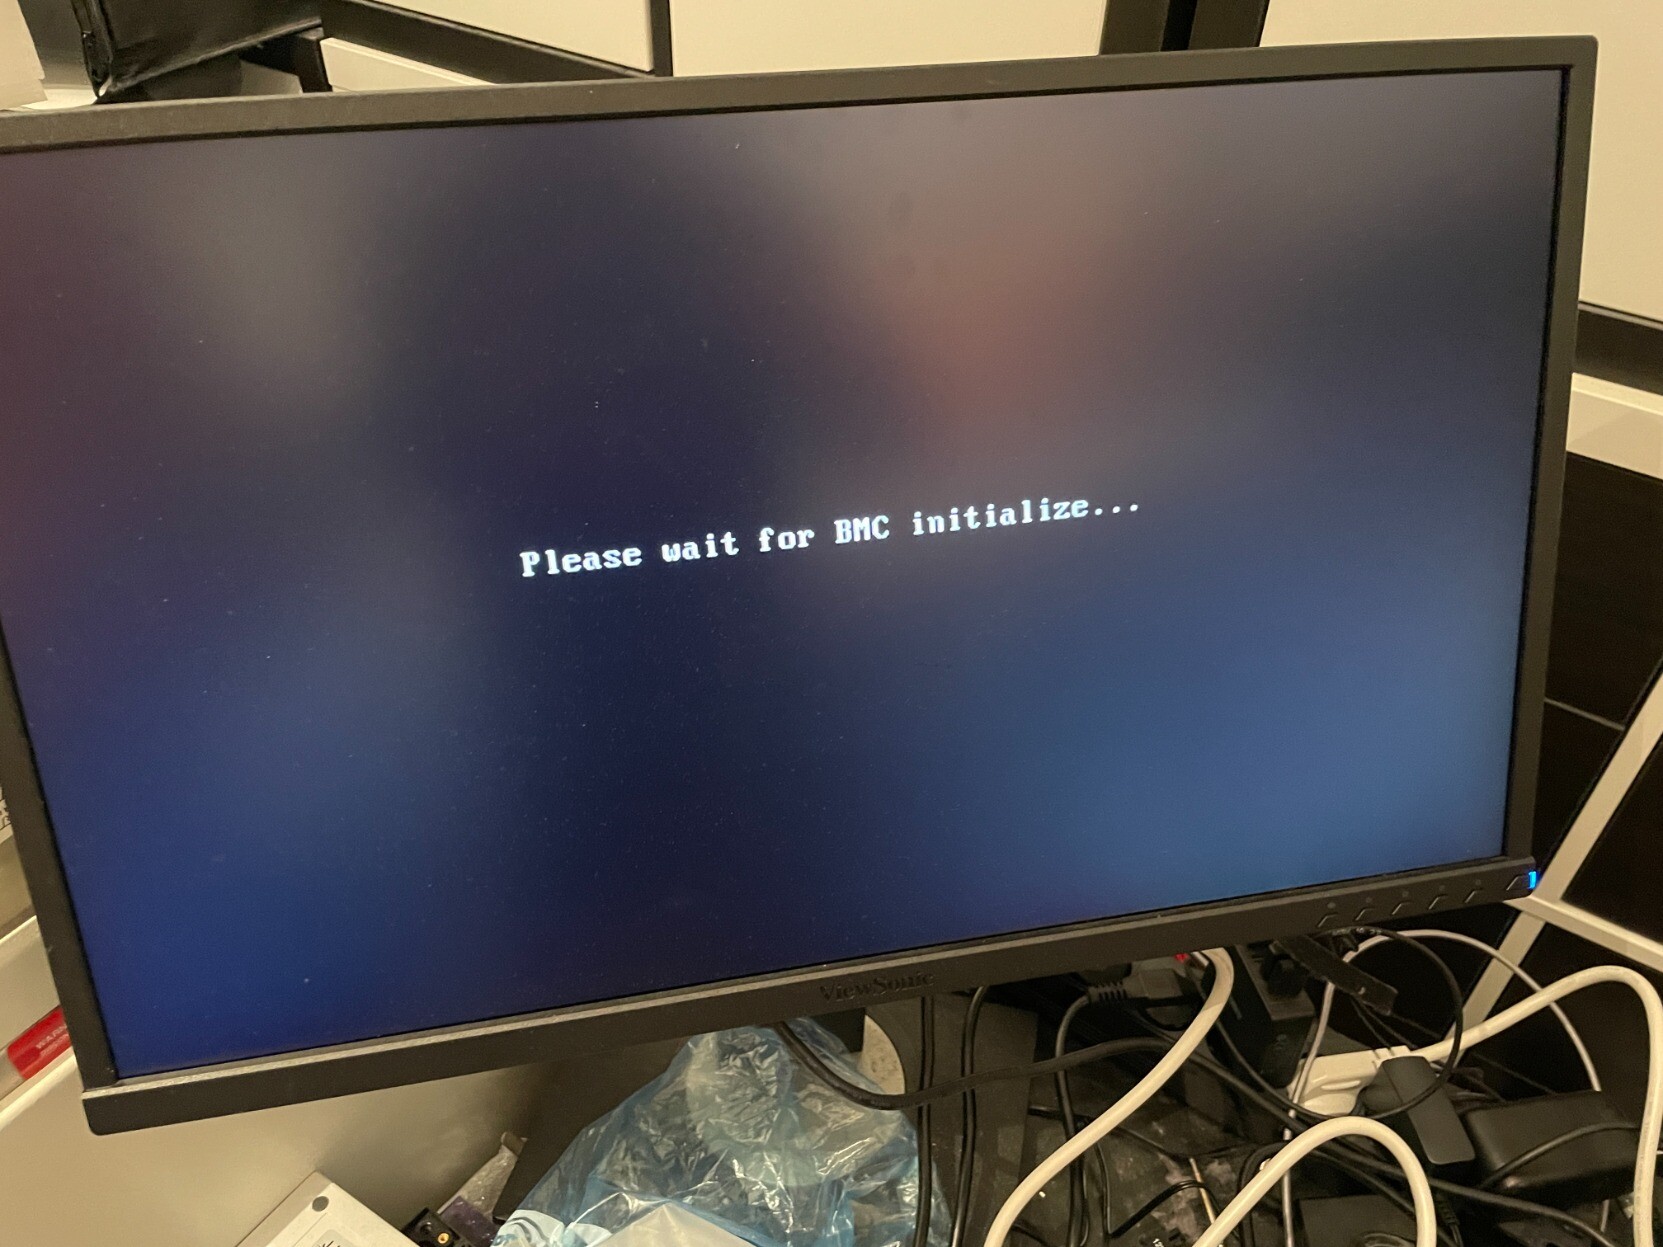 Monitor, showing Please wait for BMC initialize... message